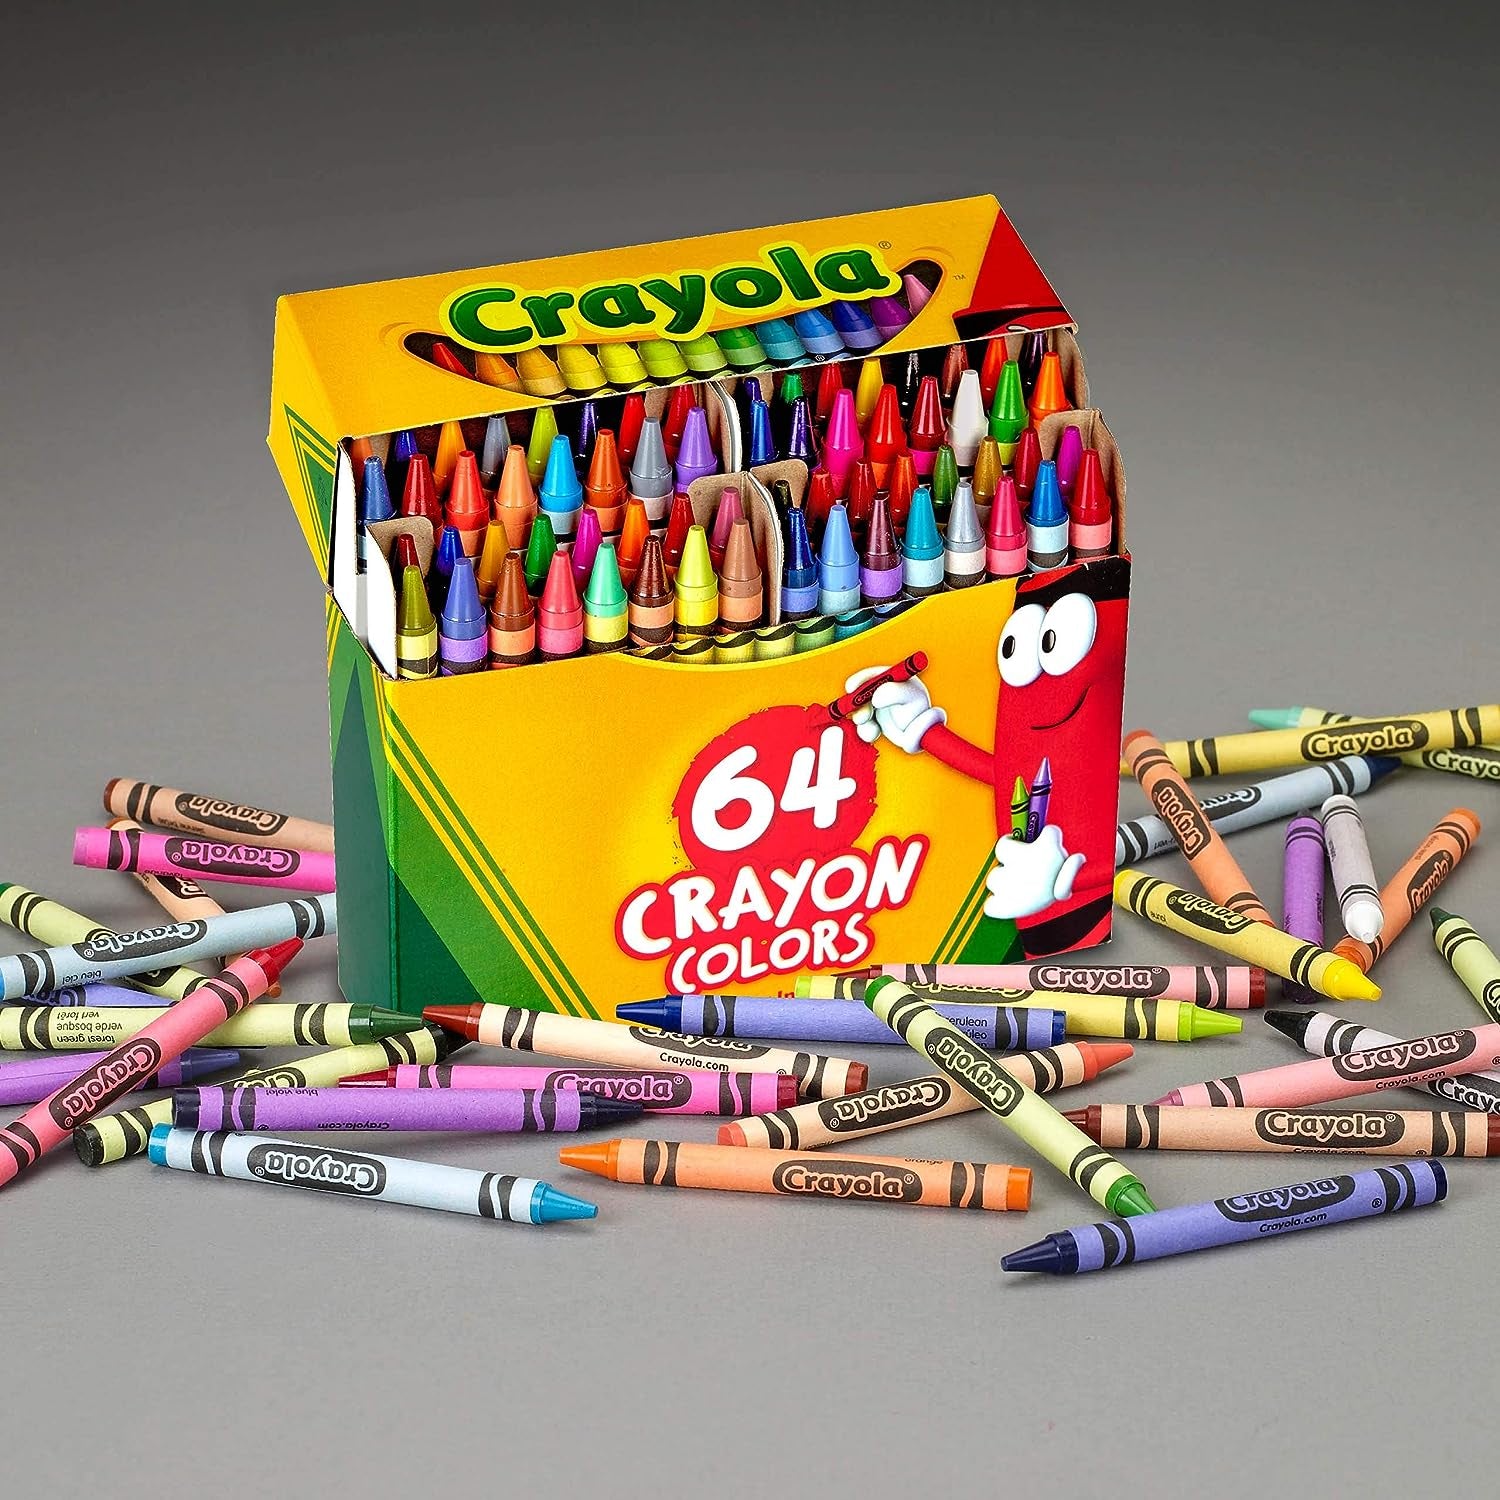 Crayola Paint Brushes: What's Inside the Box